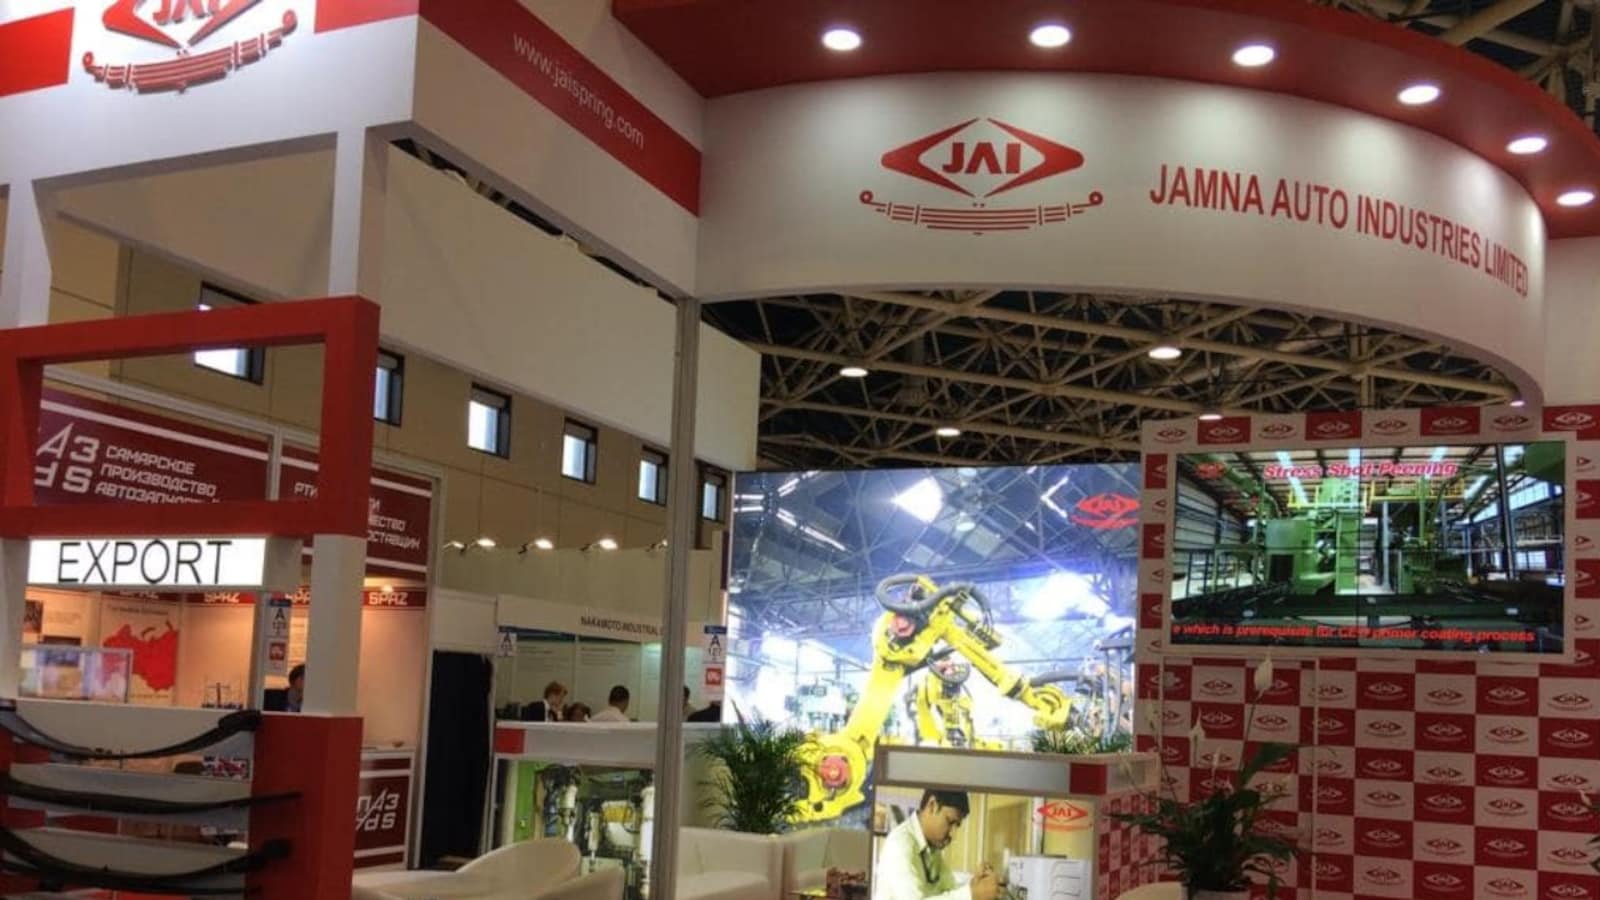 Jamna Auto Industries – Recovery in sight, buy for long term